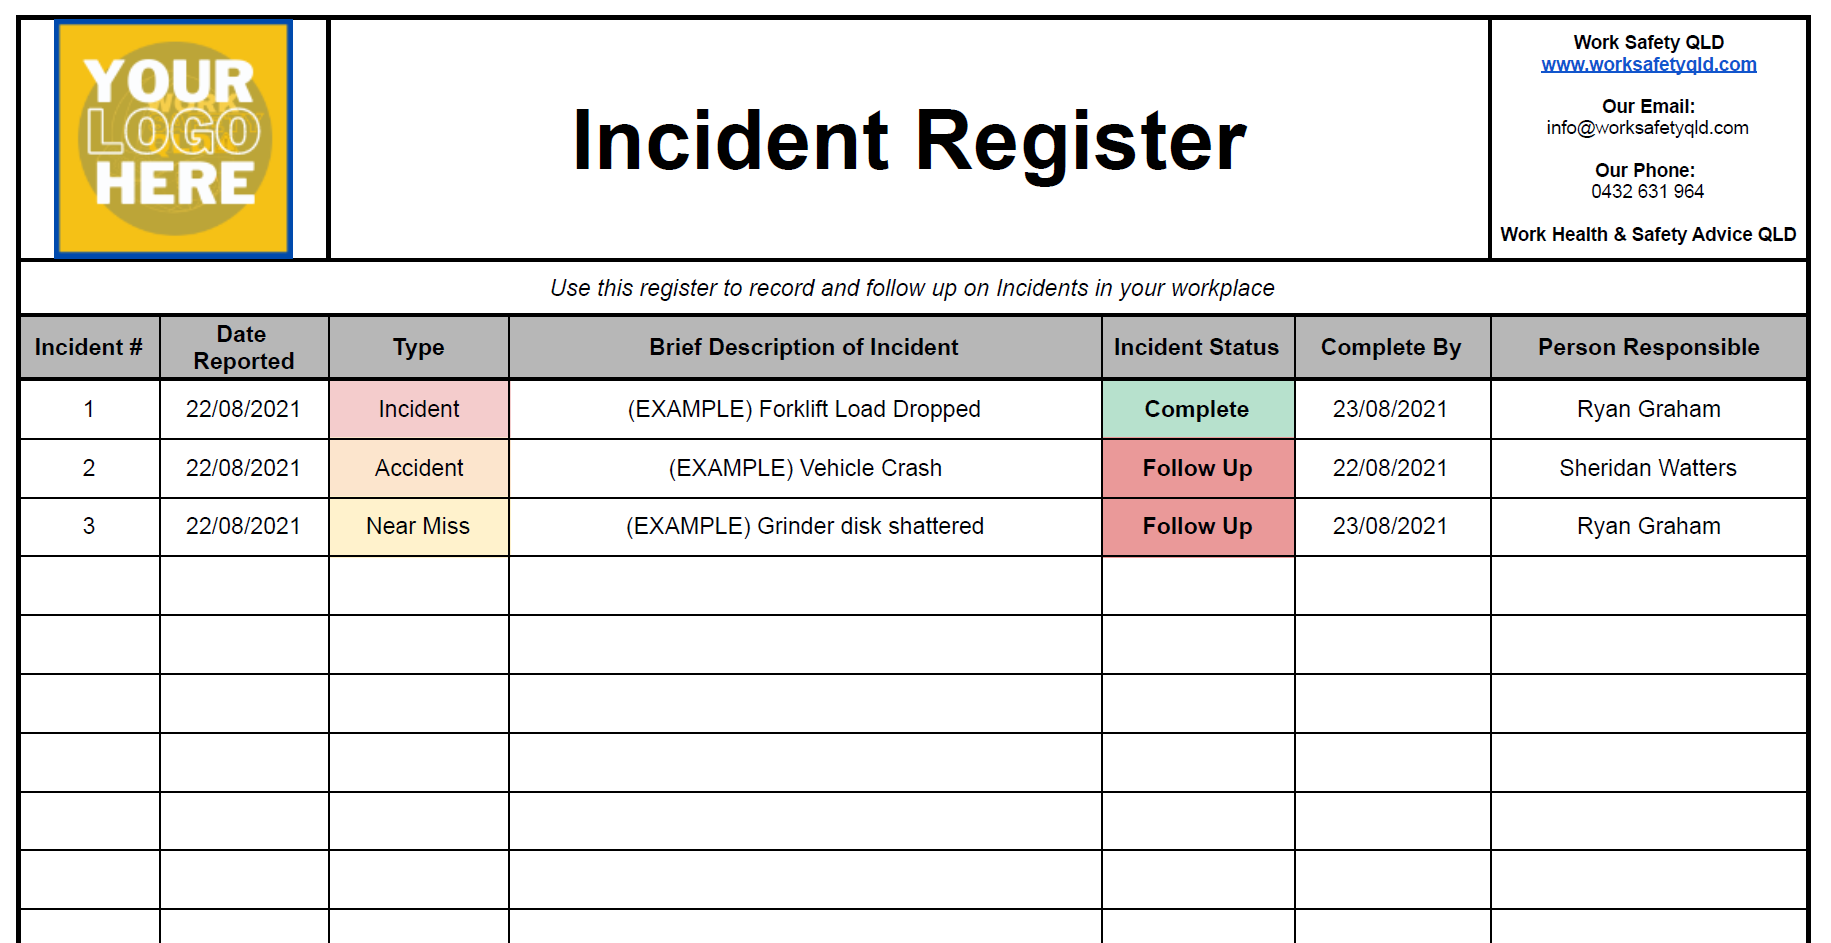 Free Incident Register Template For Queensland - Work Safety QLD Throughout Incident Report Register Template